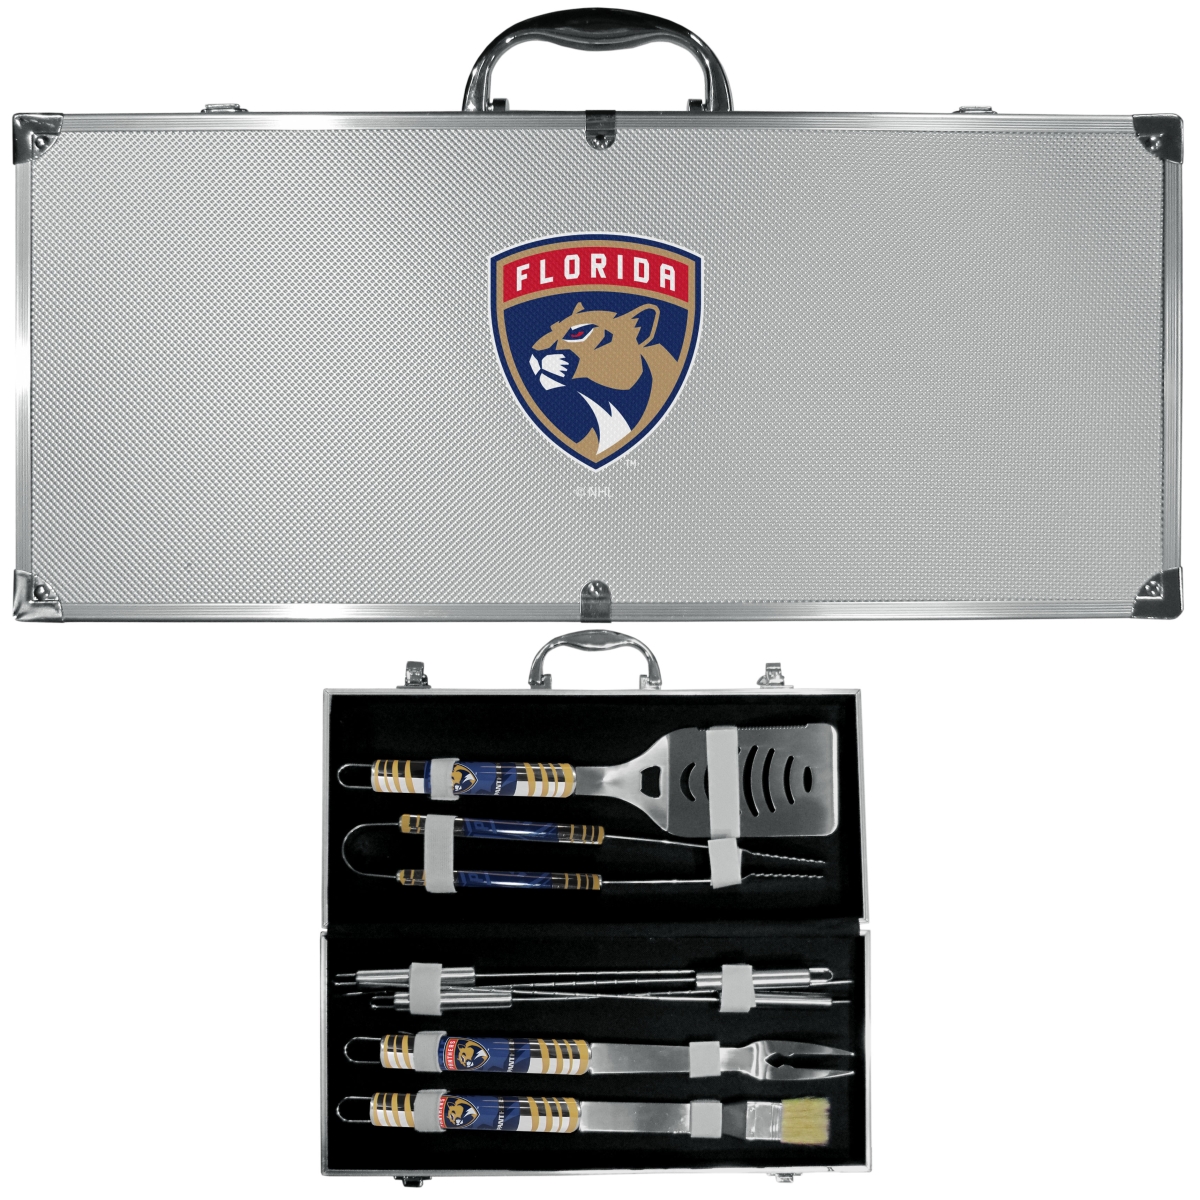 Picture of Siskiyou H8BQ95 Unisex NHL Florida Panthers 8 Piece Tailgater BBQ Set